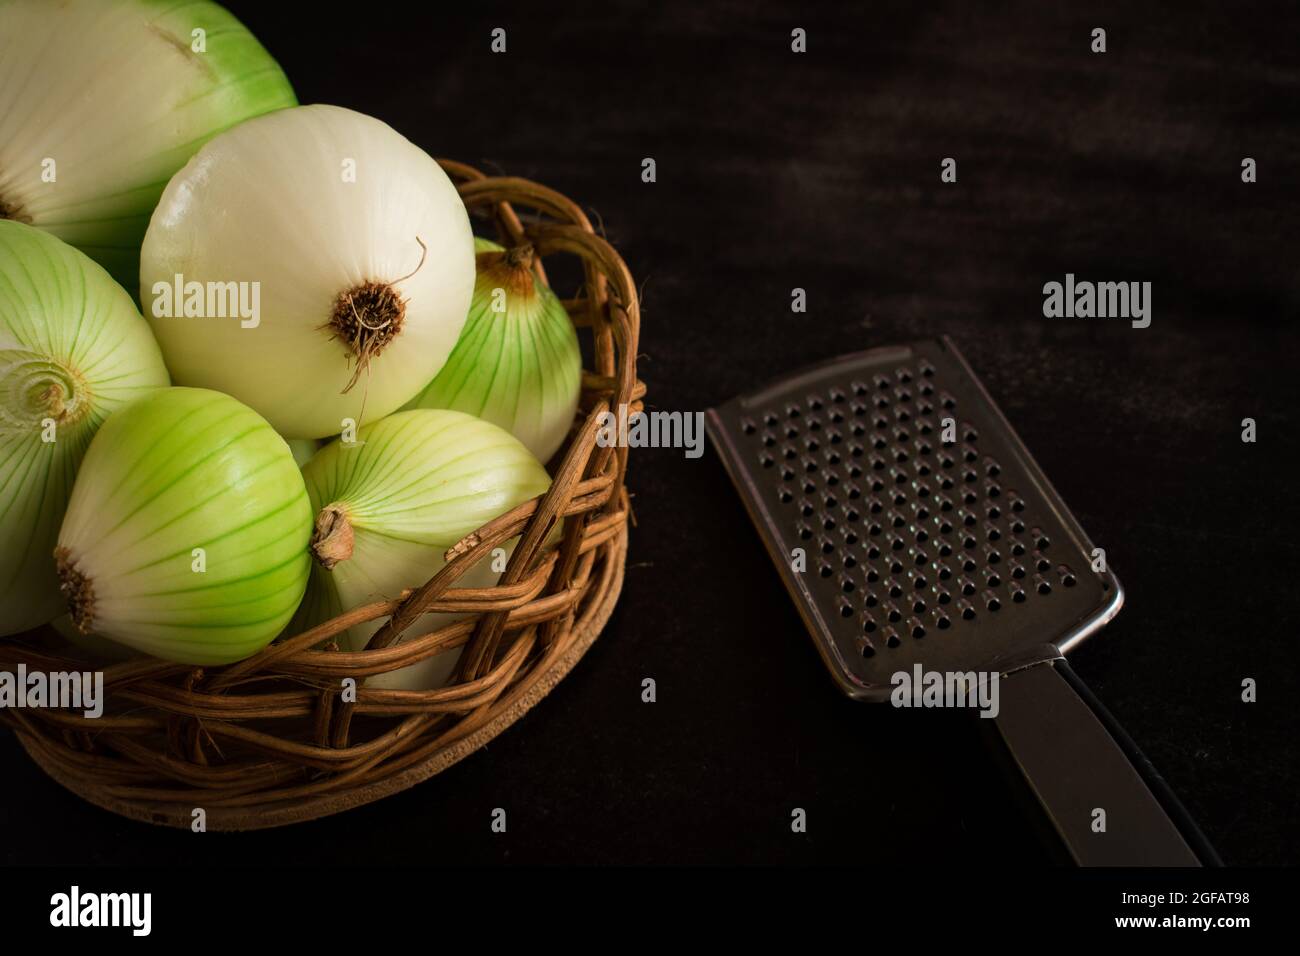 Some big green onions to cook in a brown basket and a metal grater on a black table with copy space Stock Photo